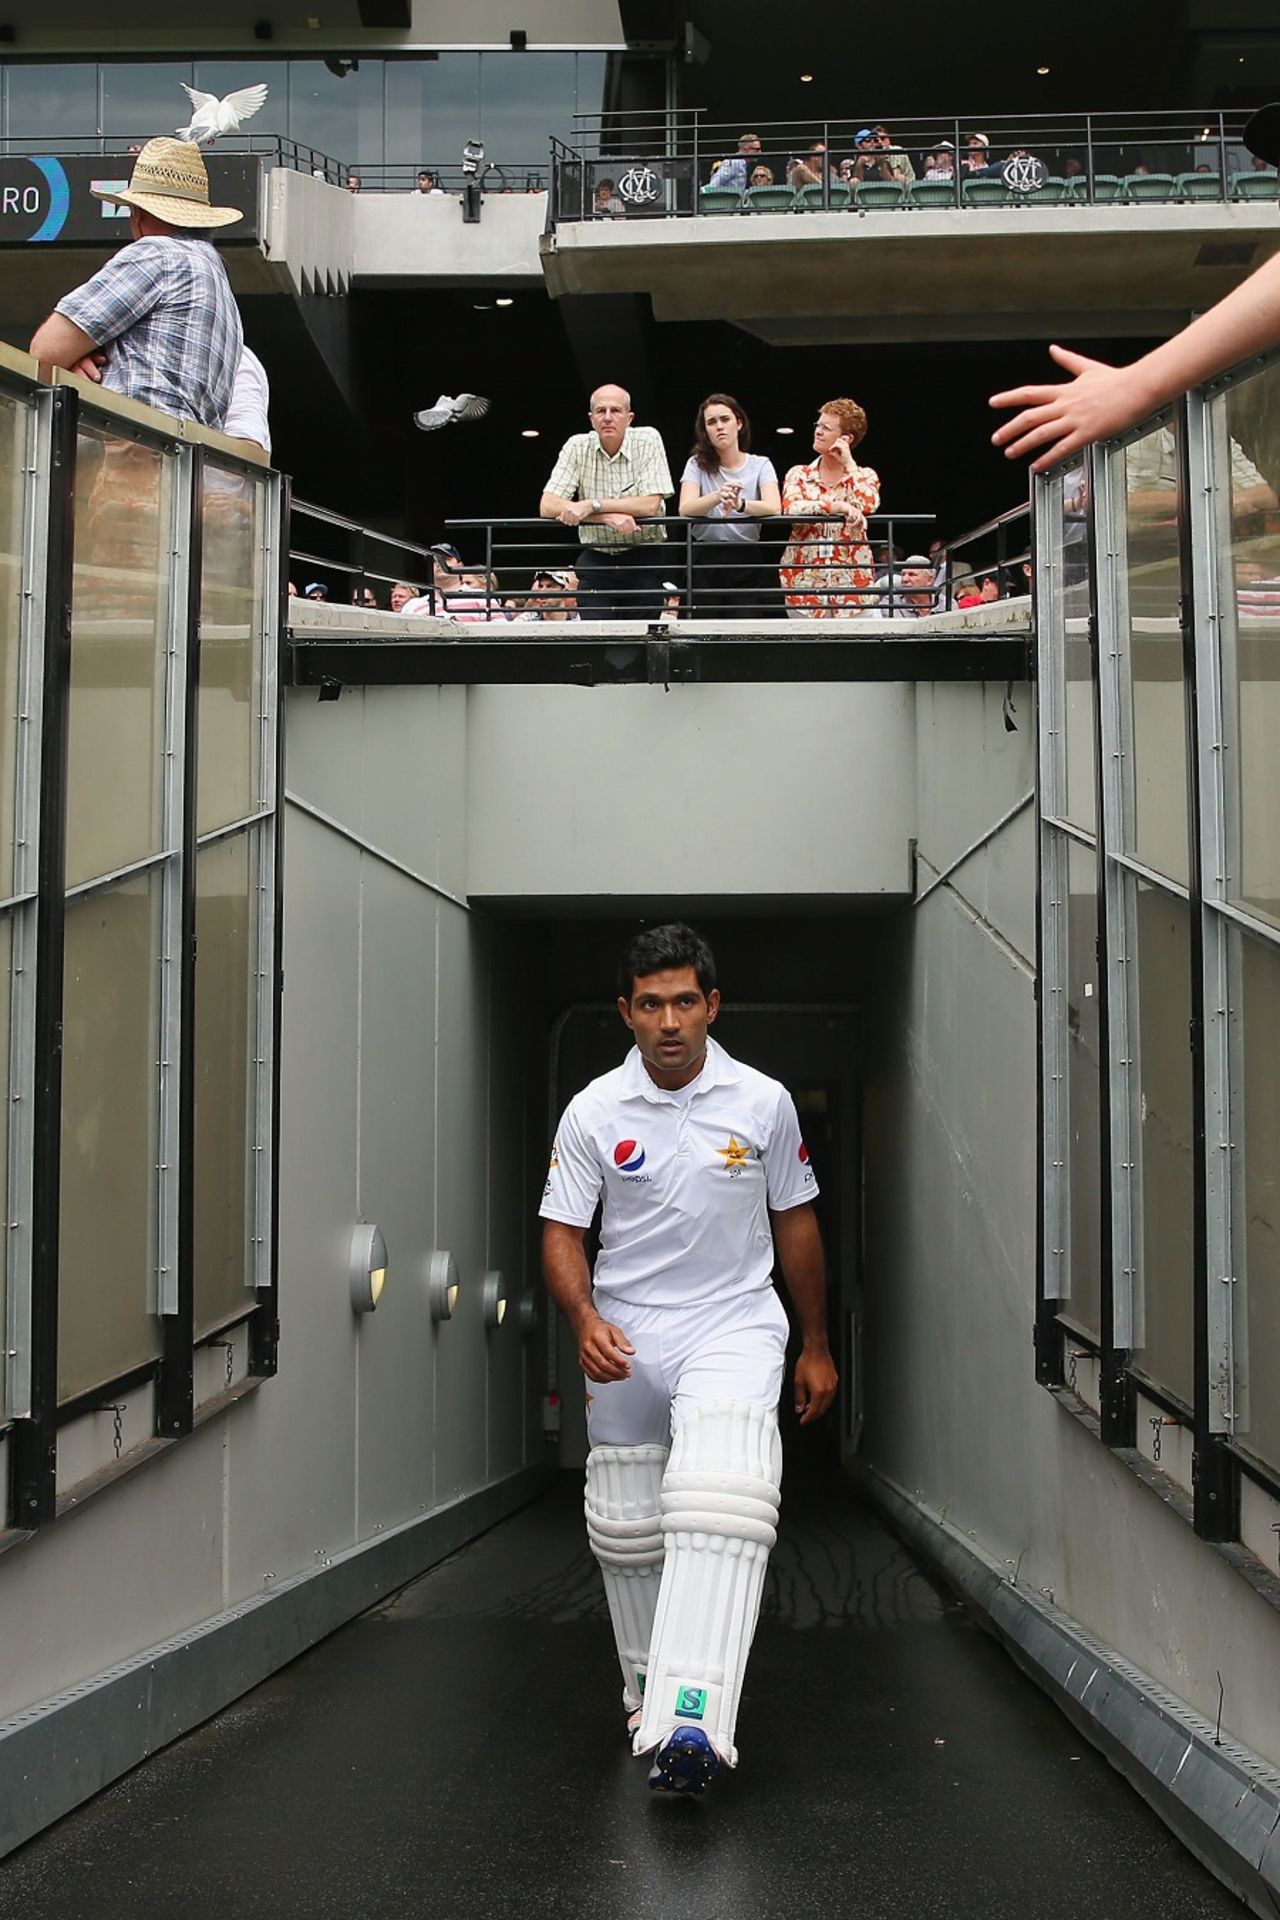 Asad Shafiq strides out of a tunnel and into the field, Australia v Pakistan, 2nd Test, 2nd day, Melbourne, December 27, 2016